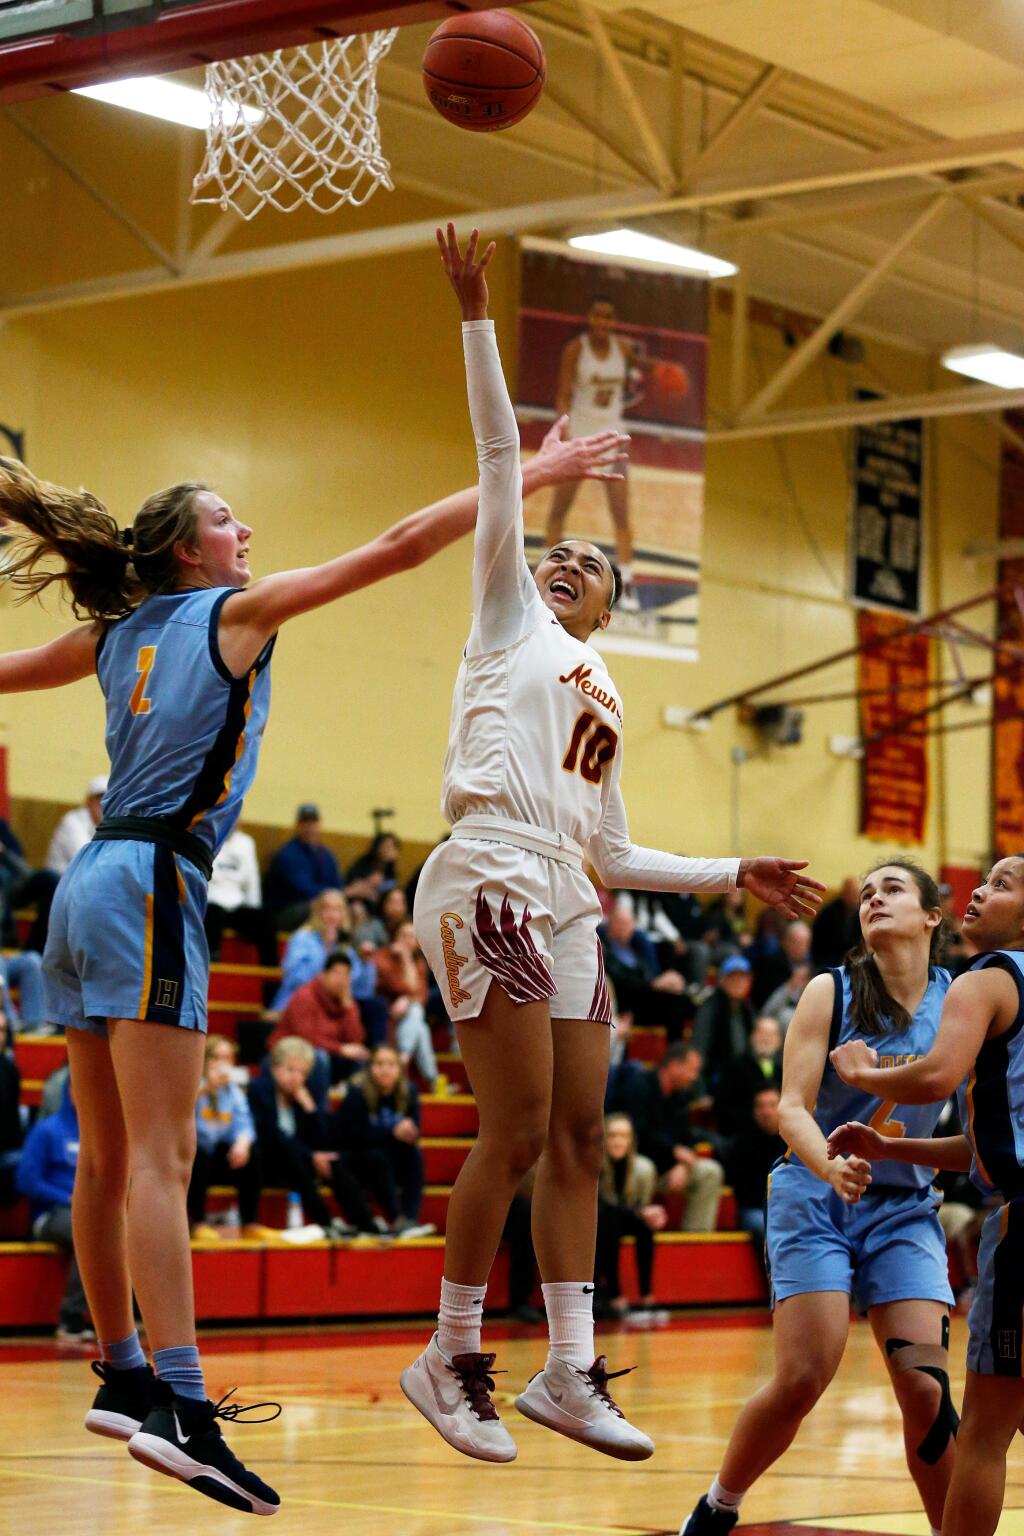 Cardinal Newman's Anya Choice, center, scores two past Heritage's Amanda Muse, left, during the first half of the NCS Open Division playoff game in Santa Rosa on Thursday, February 20, 2020. (Alvin Jornada / The Press Democrat)